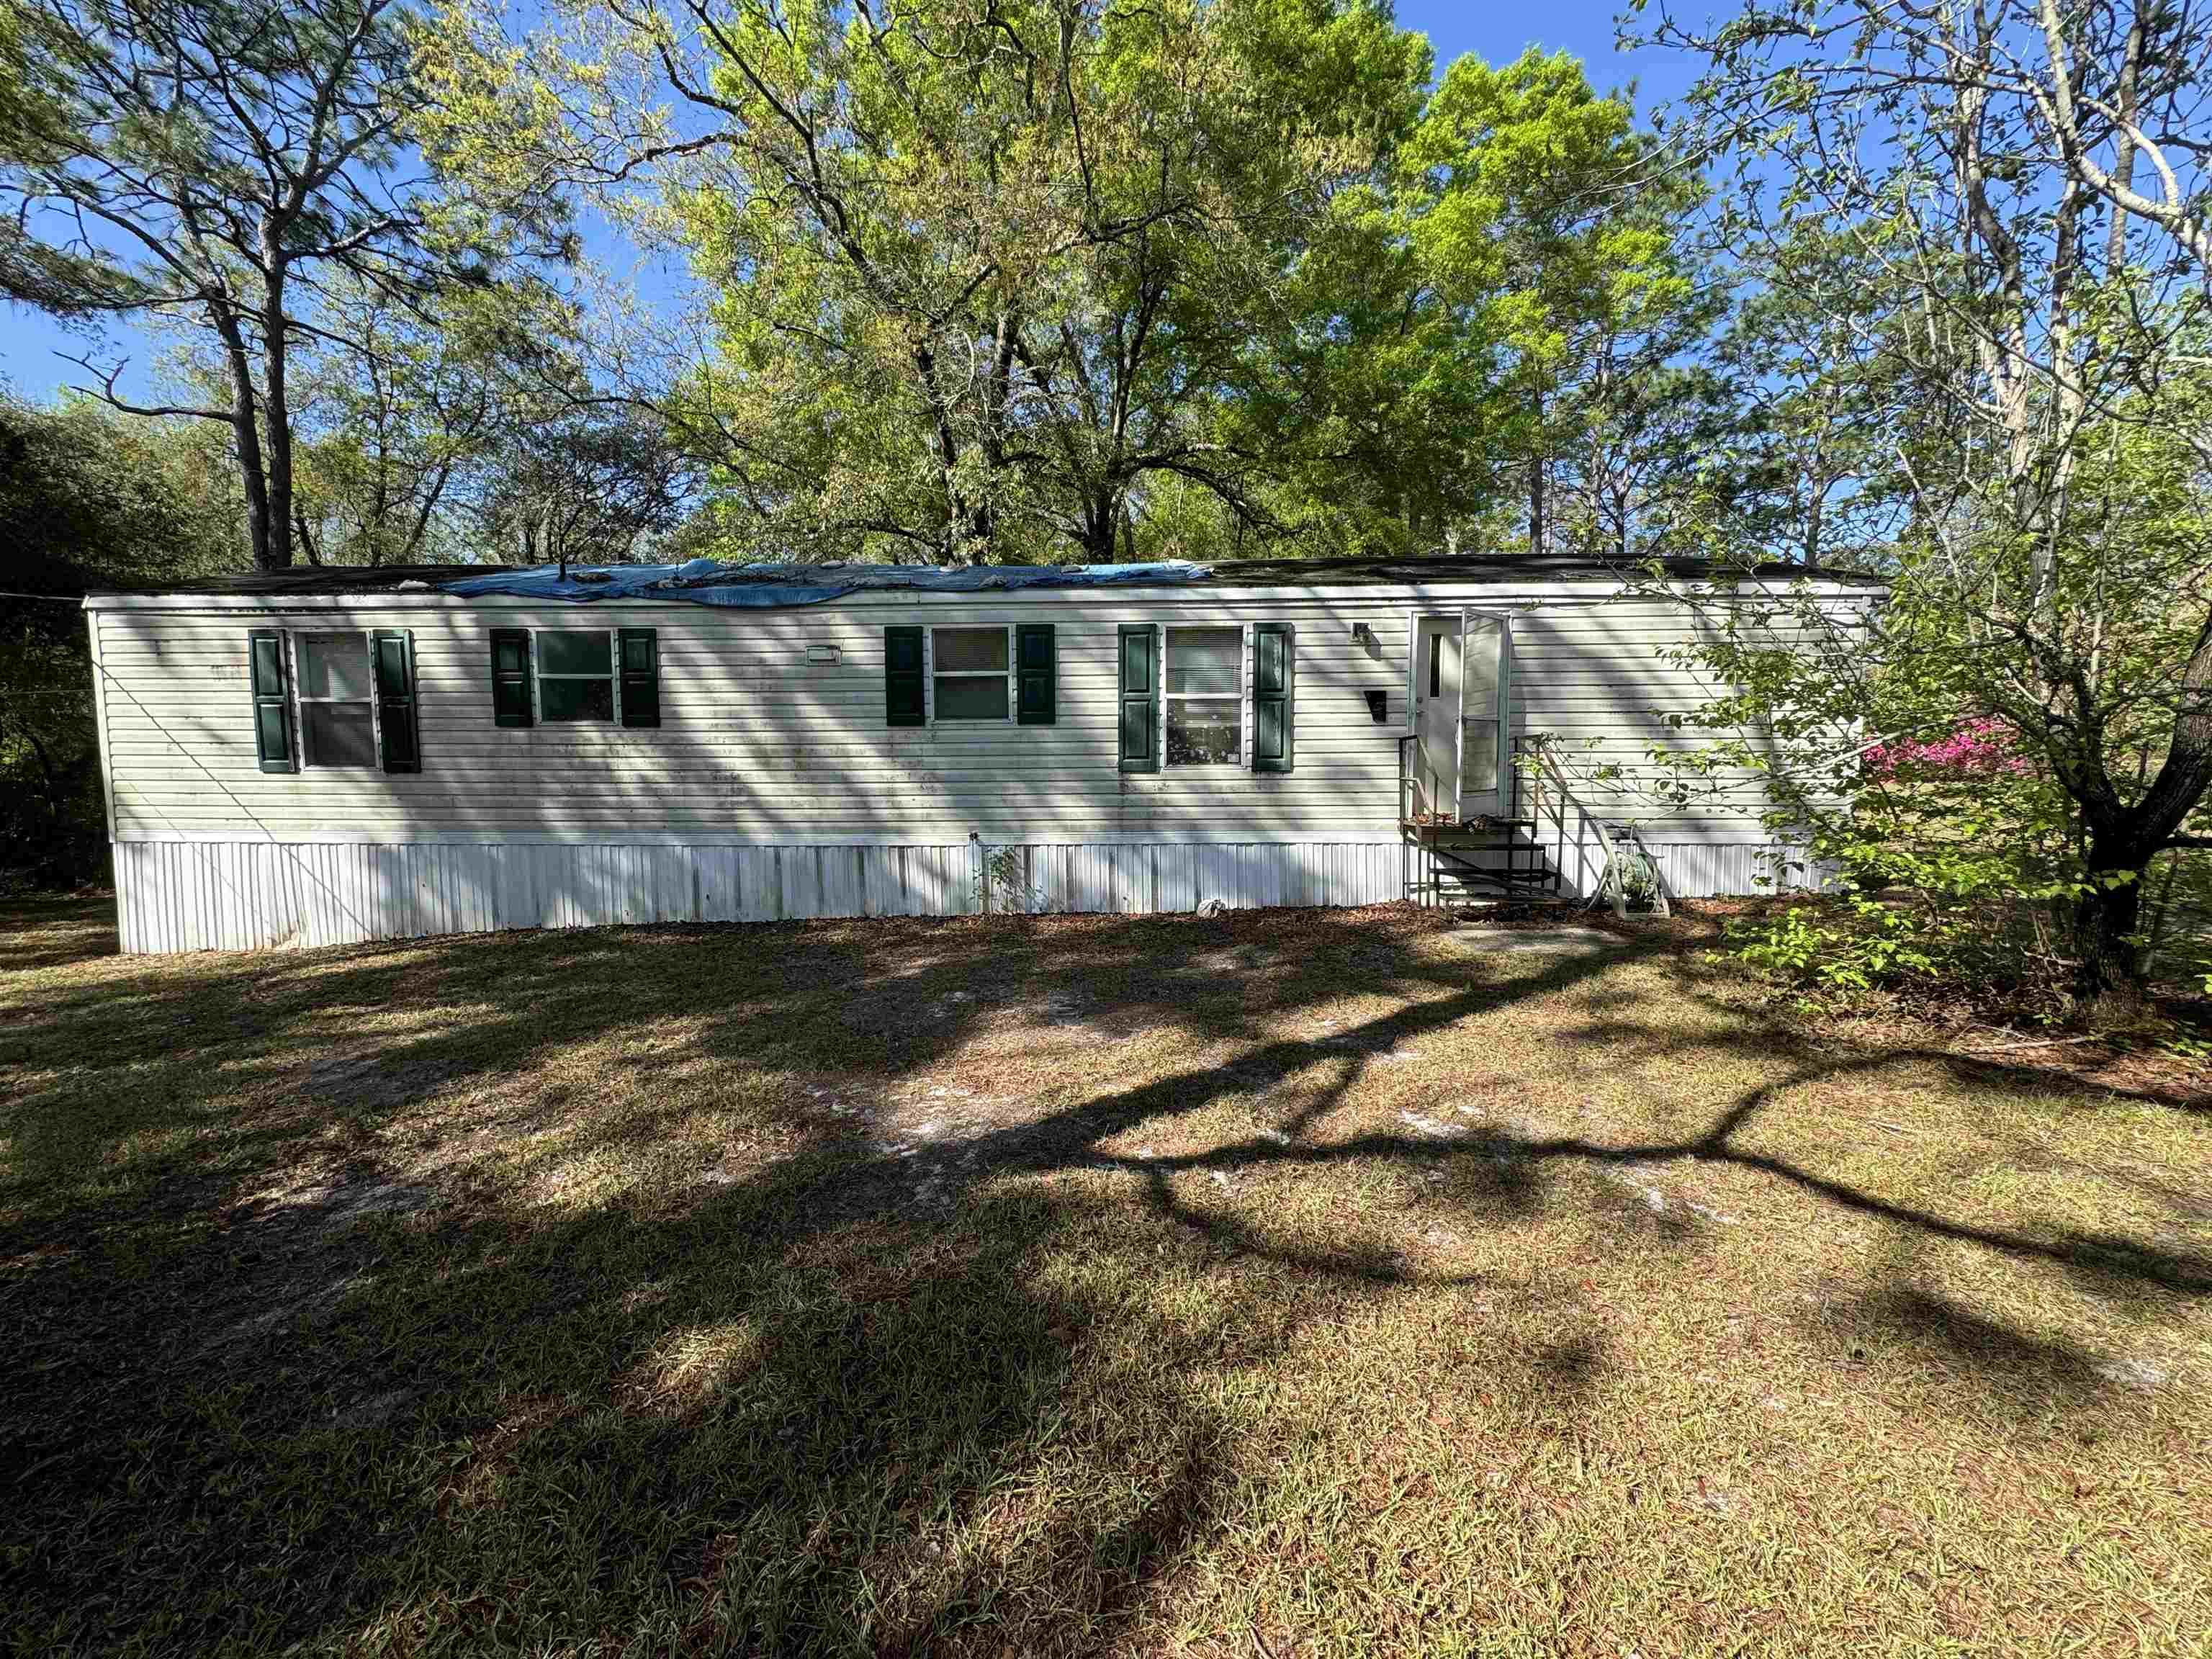 9498 Courtney Lane,TALLAHASSEE,Florida 32305,2 Bedrooms Bedrooms,1 BathroomBathrooms,Manuf/mobile home,9498 Courtney Lane,370248